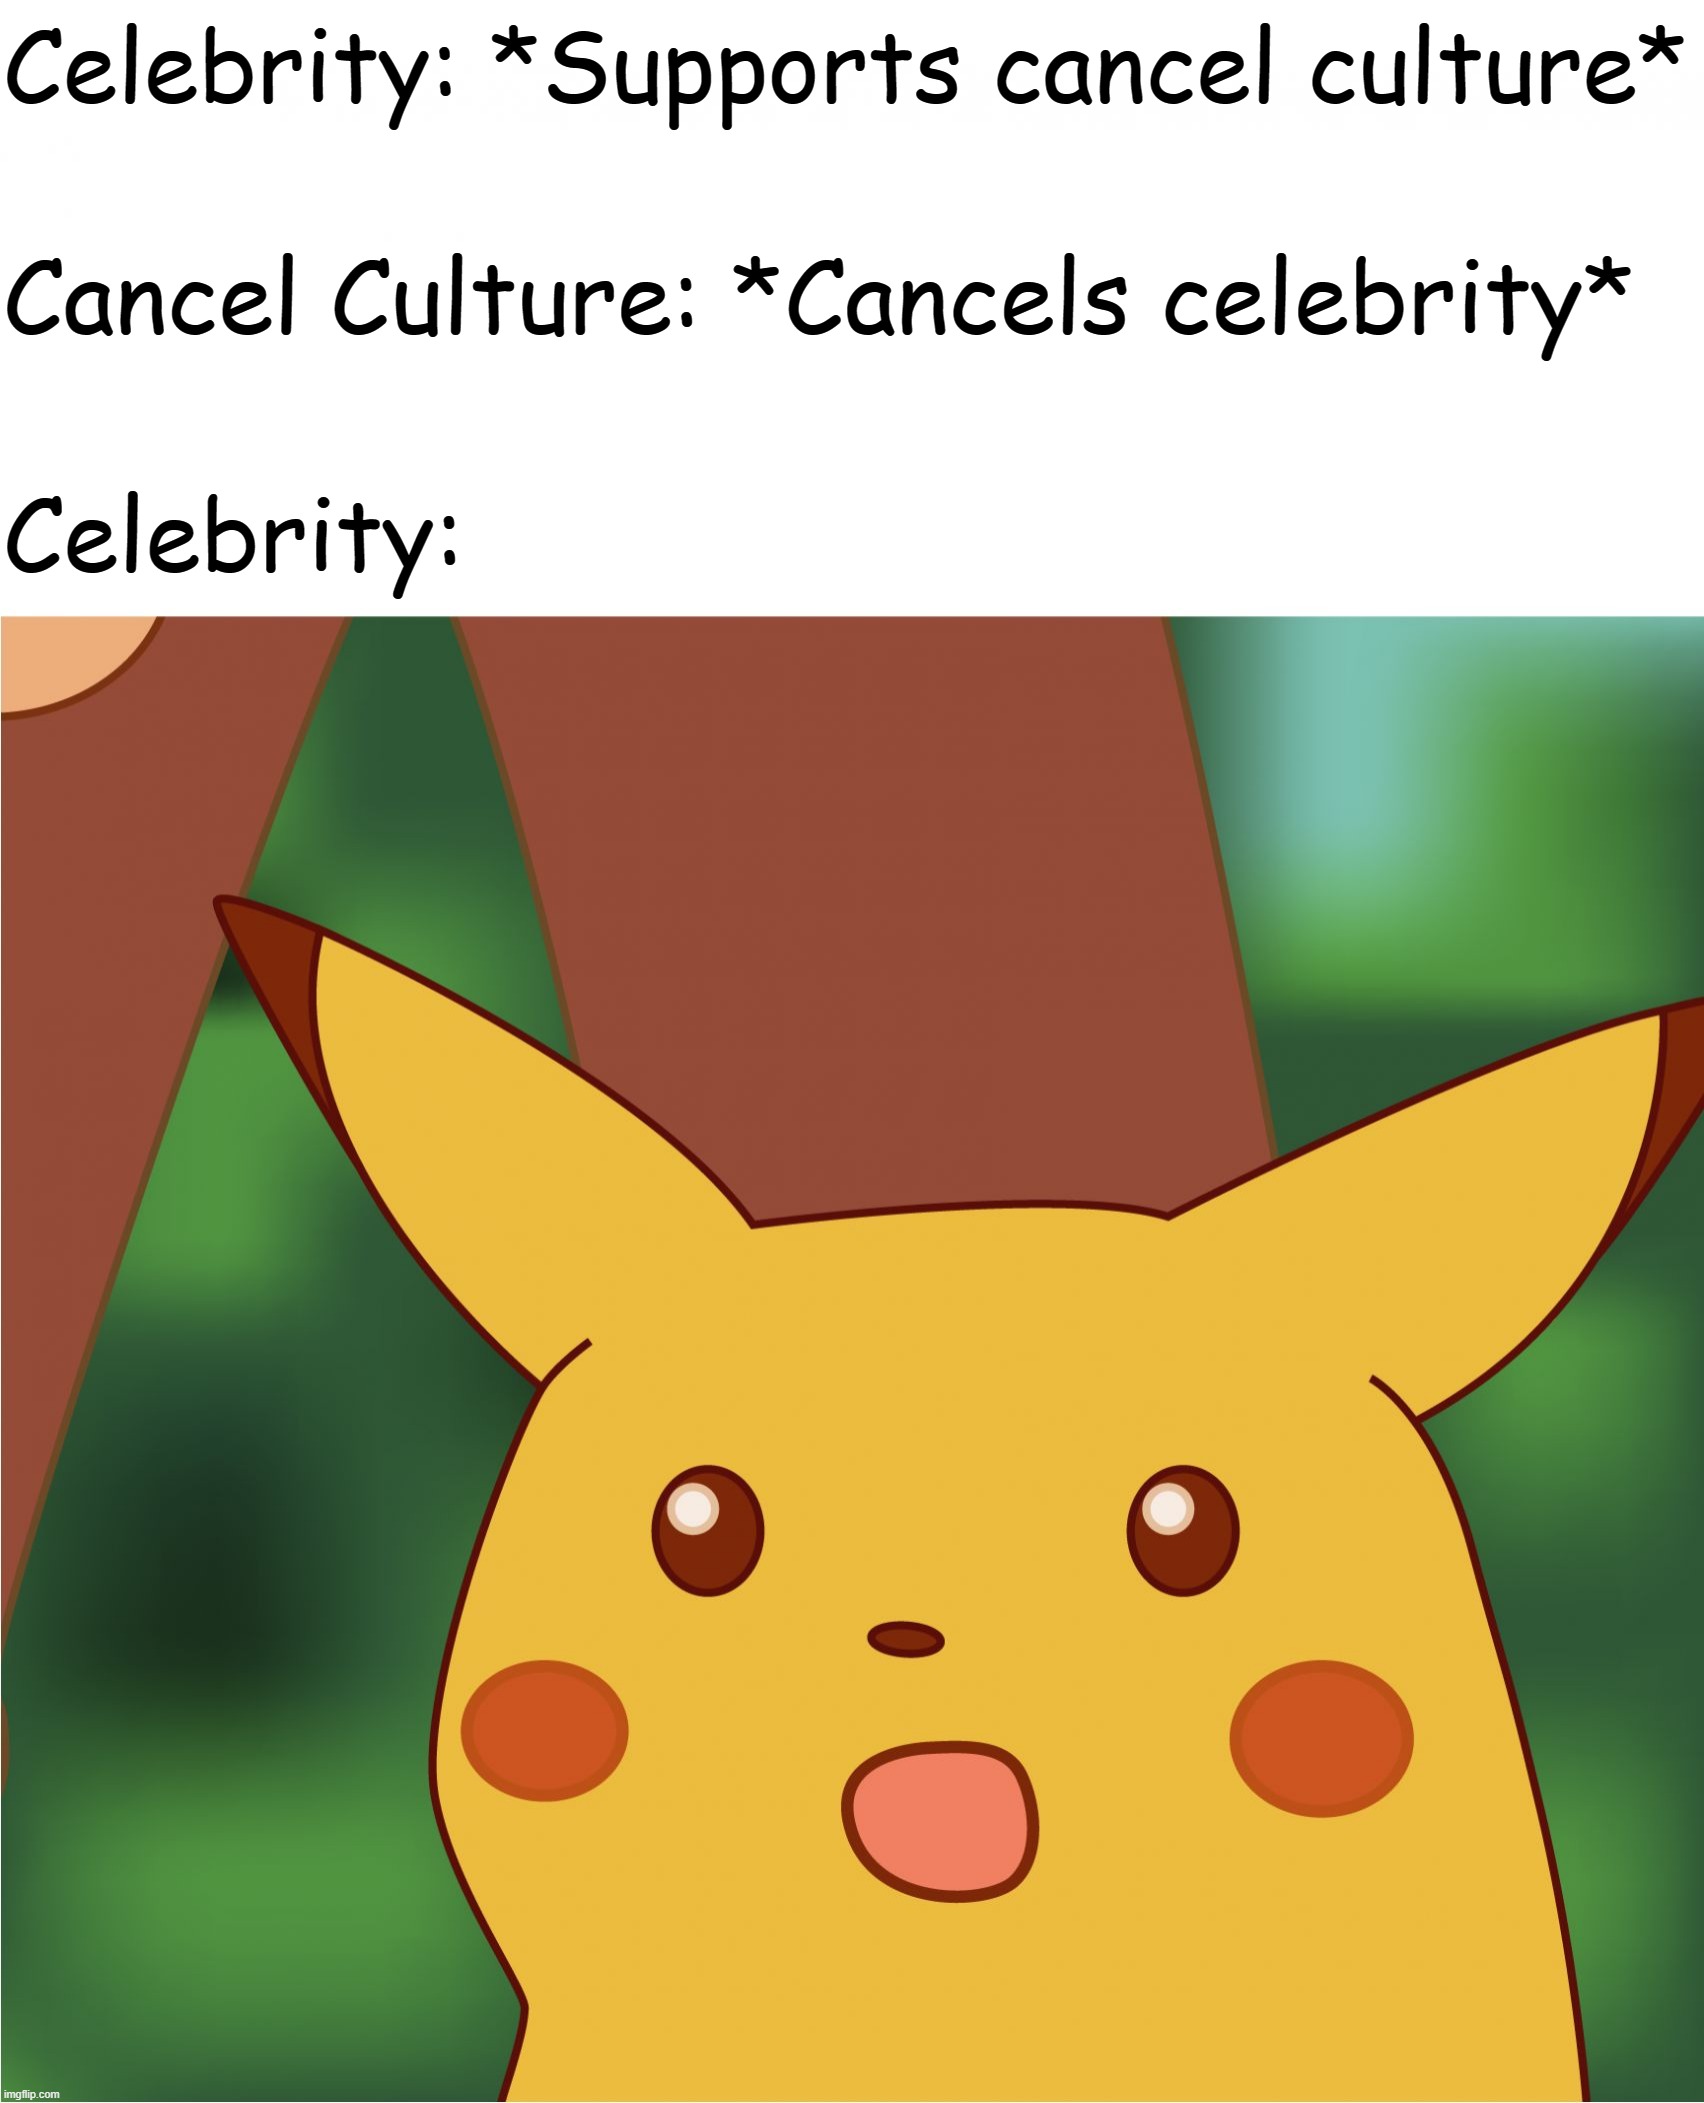 Surprised Pikachu (High Quality) | Celebrity: *Supports cancel culture*; Cancel Culture: *Cancels celebrity*; Celebrity: | image tagged in surprised pikachu high quality | made w/ Imgflip meme maker